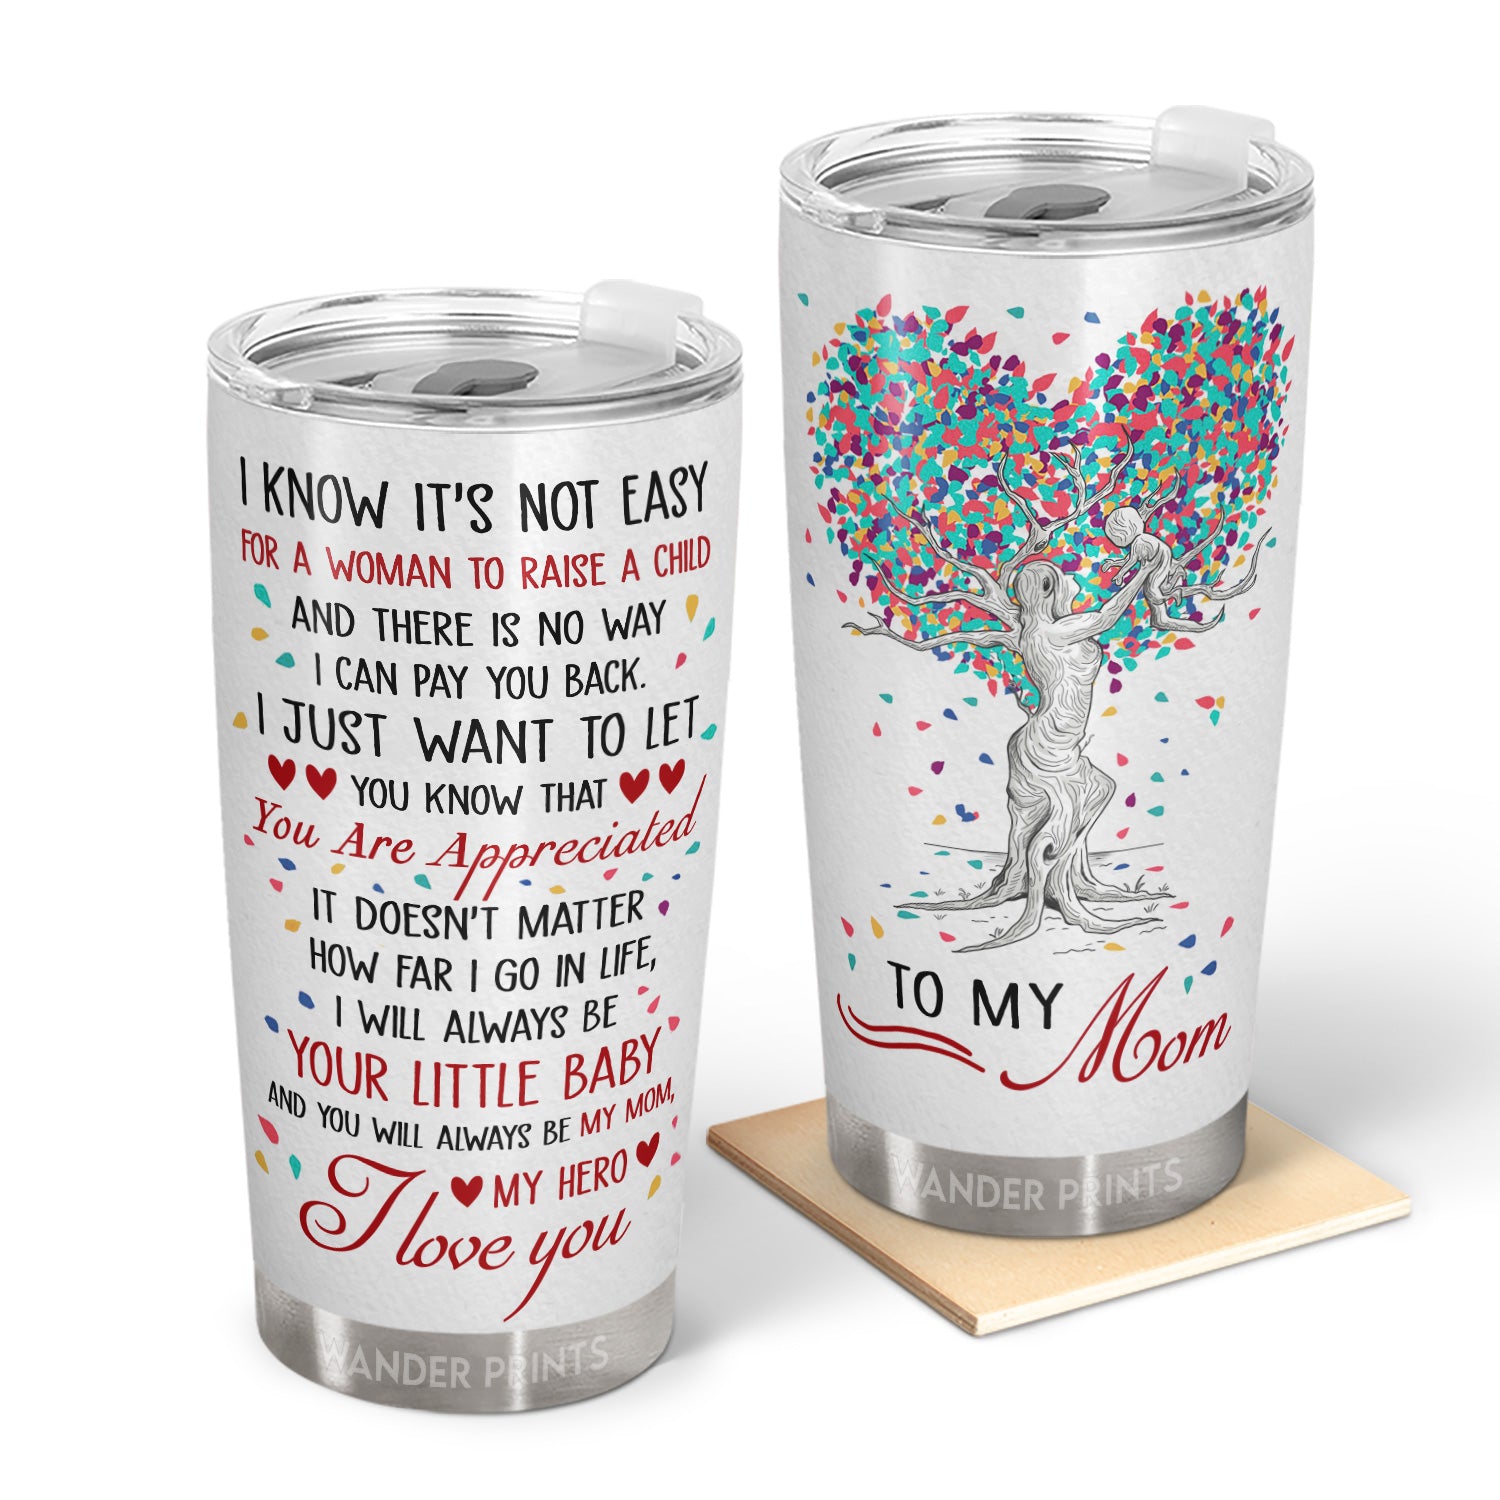 Wander Prints Mother Gifts, Gifts For Mother-in-law, Step Mom, Grandma, Mother's Day, Birthday Gifts - I Know It's Not Easy For A Woman To Raise A Child - Gift For Mom - Custom Tumbler, Travel Cup, Insulated 20oz Cup